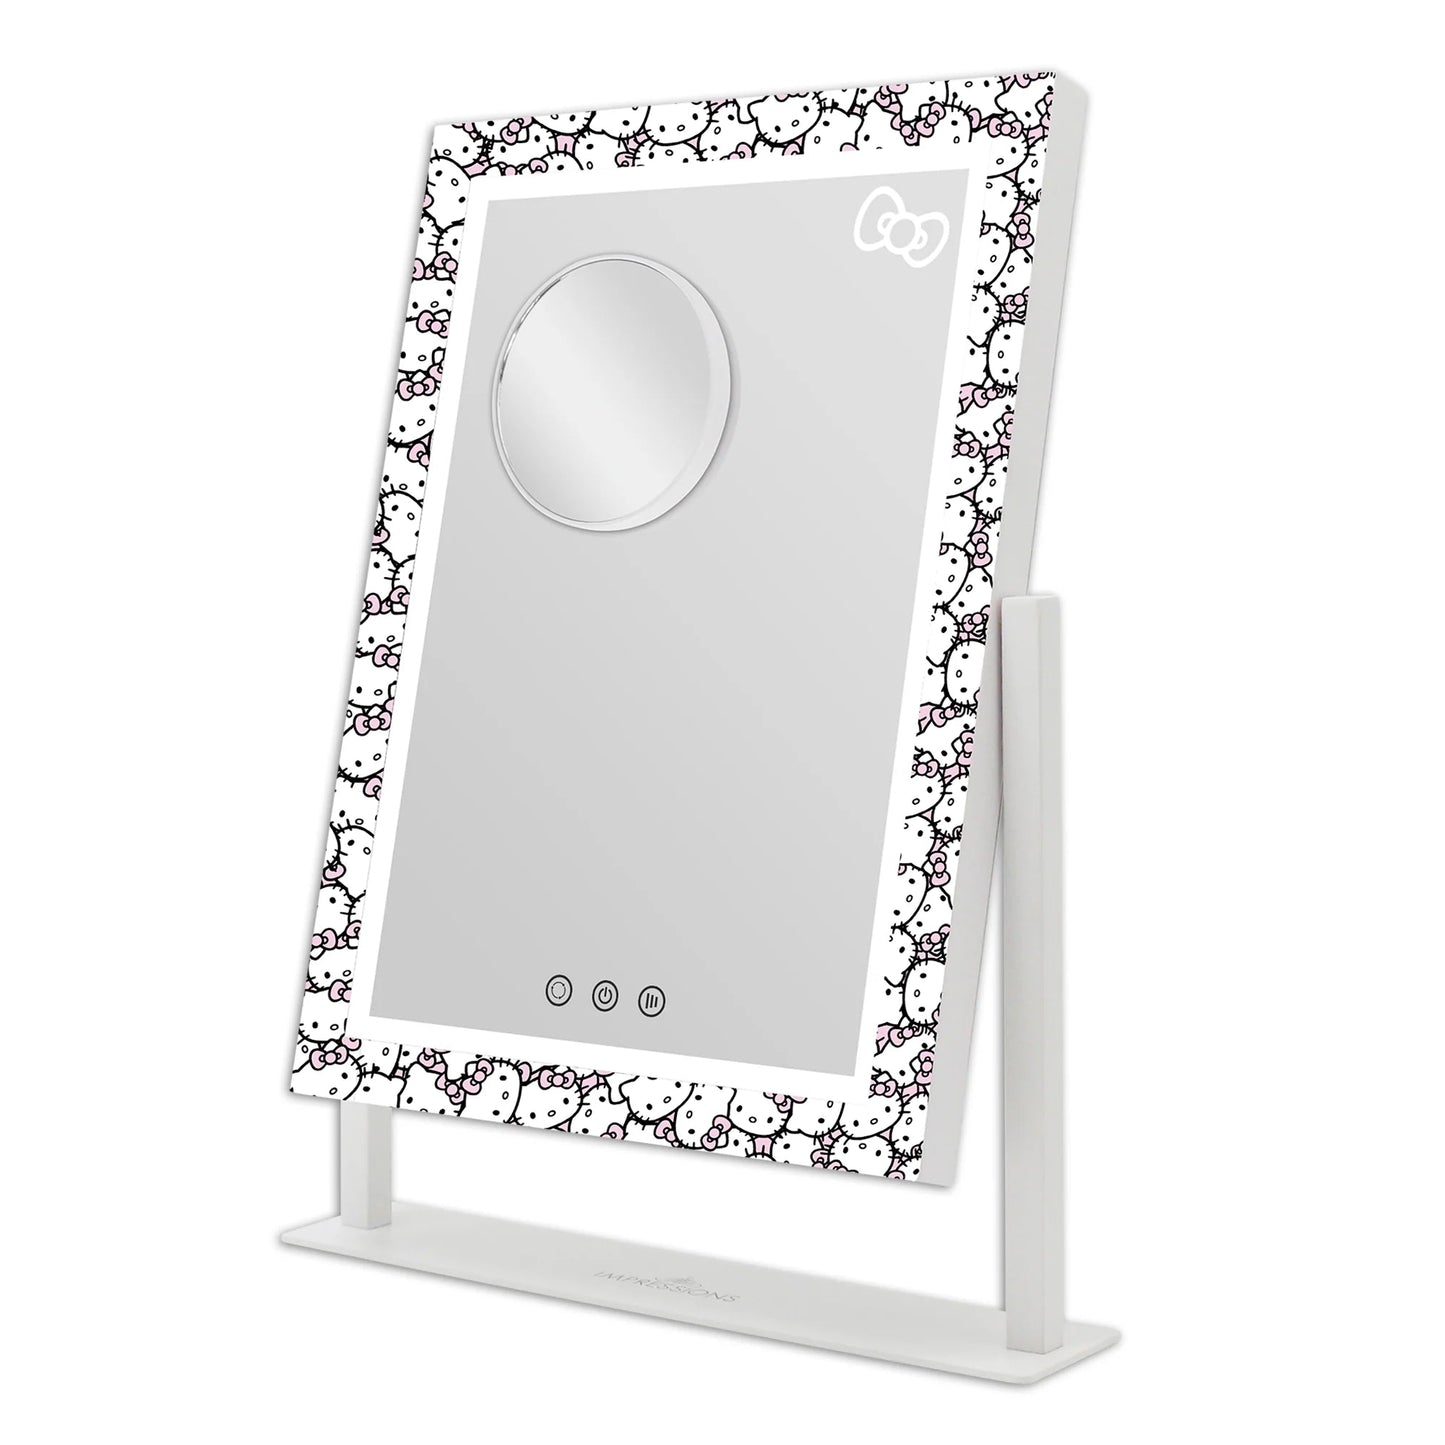 HELLO KITTY TRI-TONE LED MAKEUP MIRROR Queen Vanity Outlet 